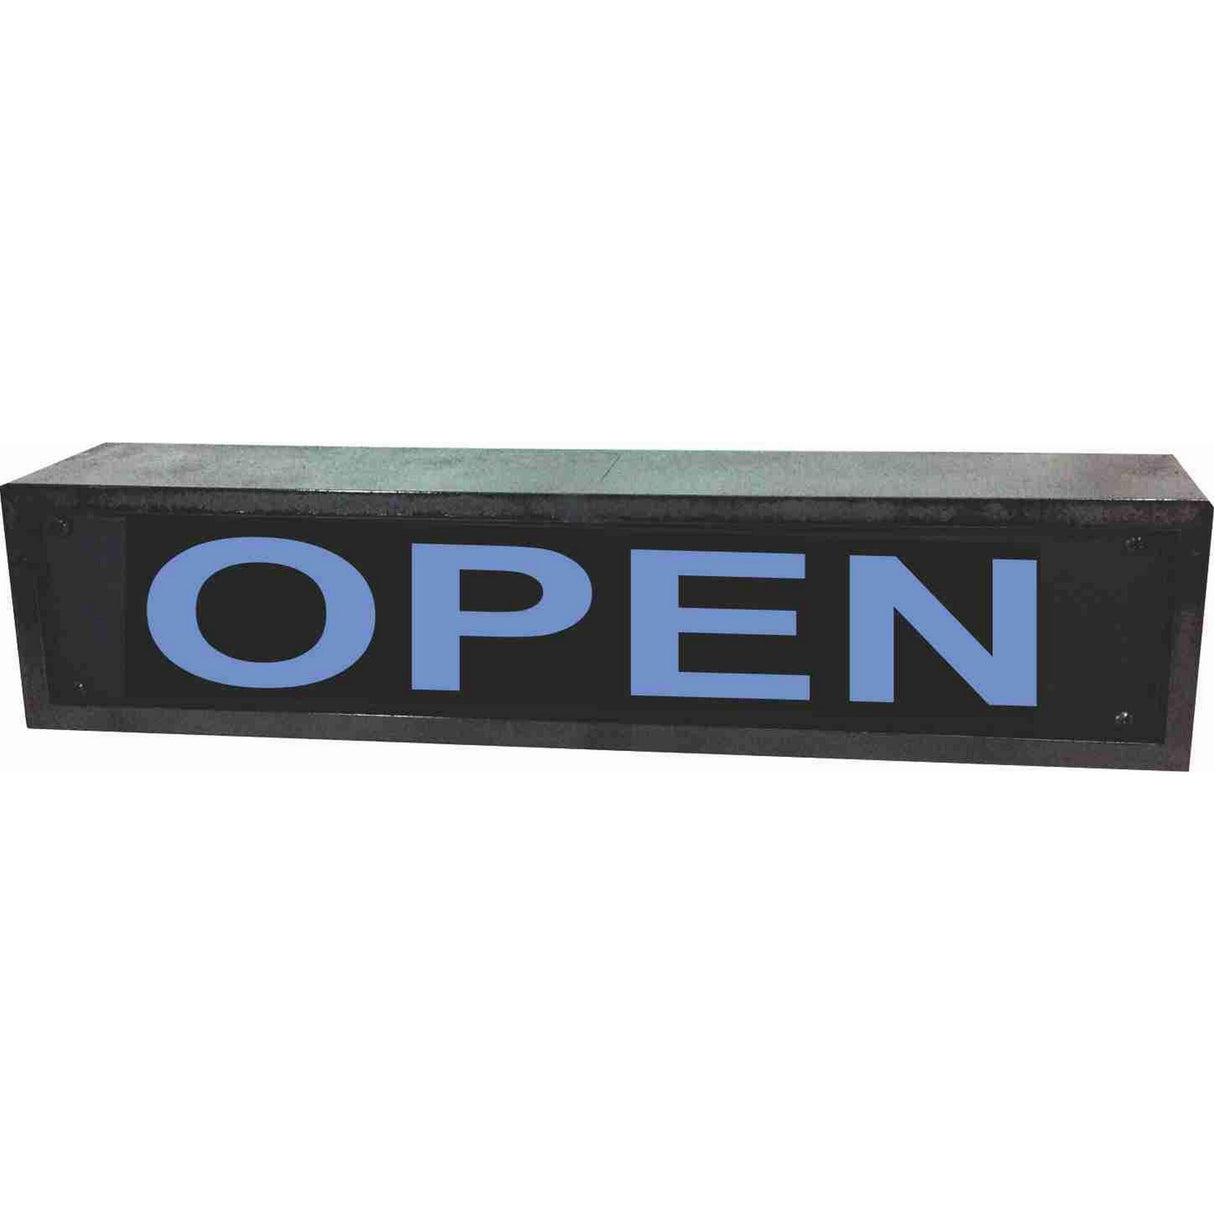 American Recorder OAS-4057-BL "OPEN" 2U Rackmount LED Lighted Sign with Enclosure, Blue